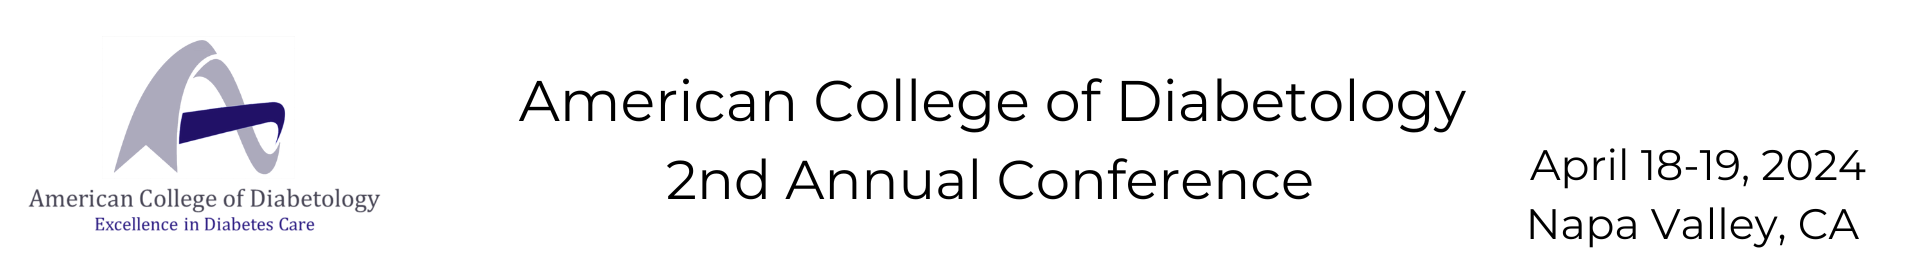 American College of Diabetology 2nd Annual Conference